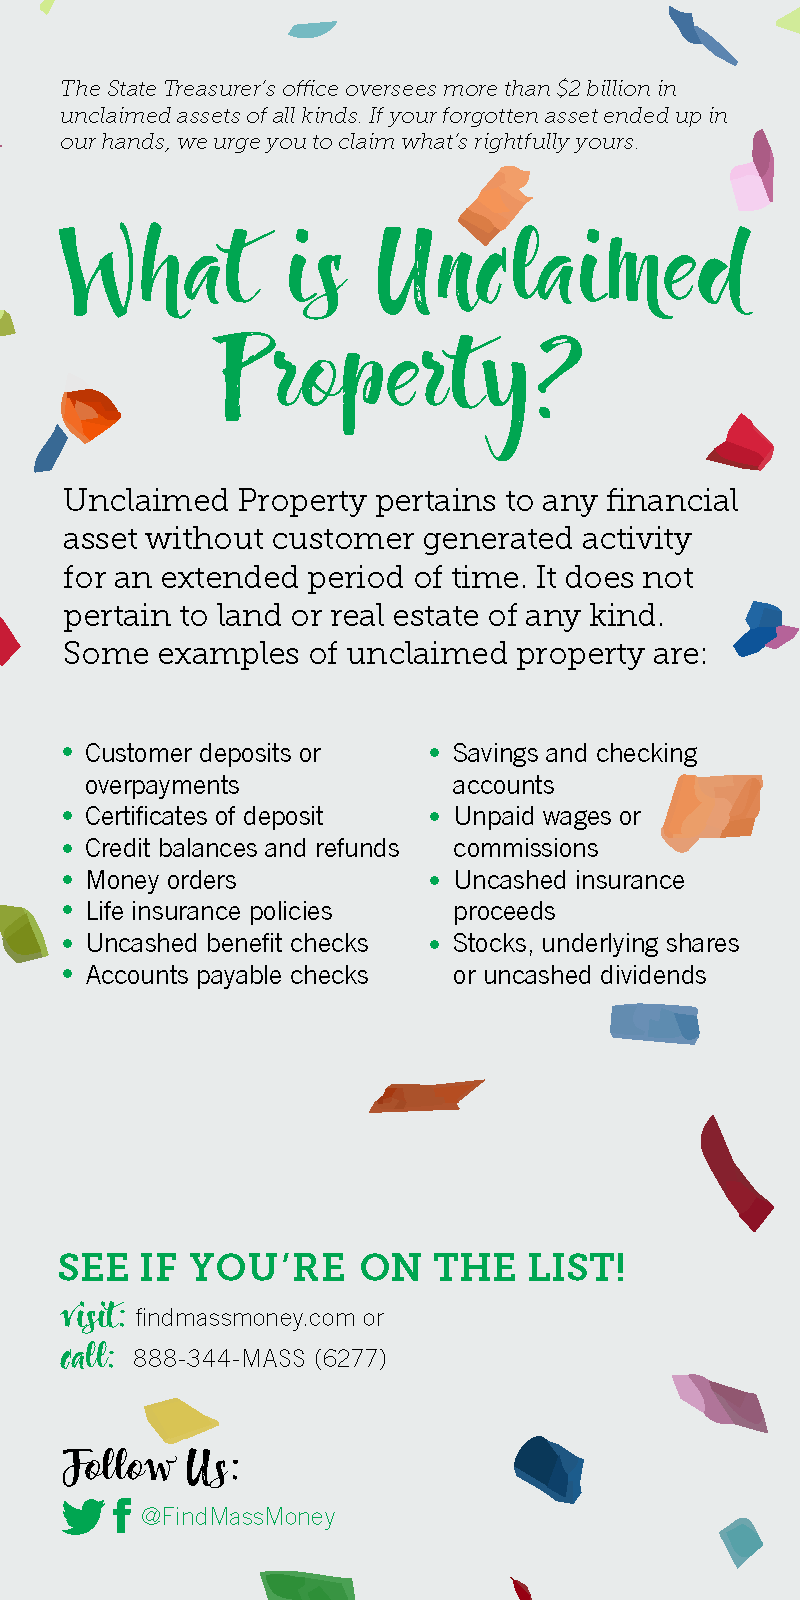 Unclaimed Property Division